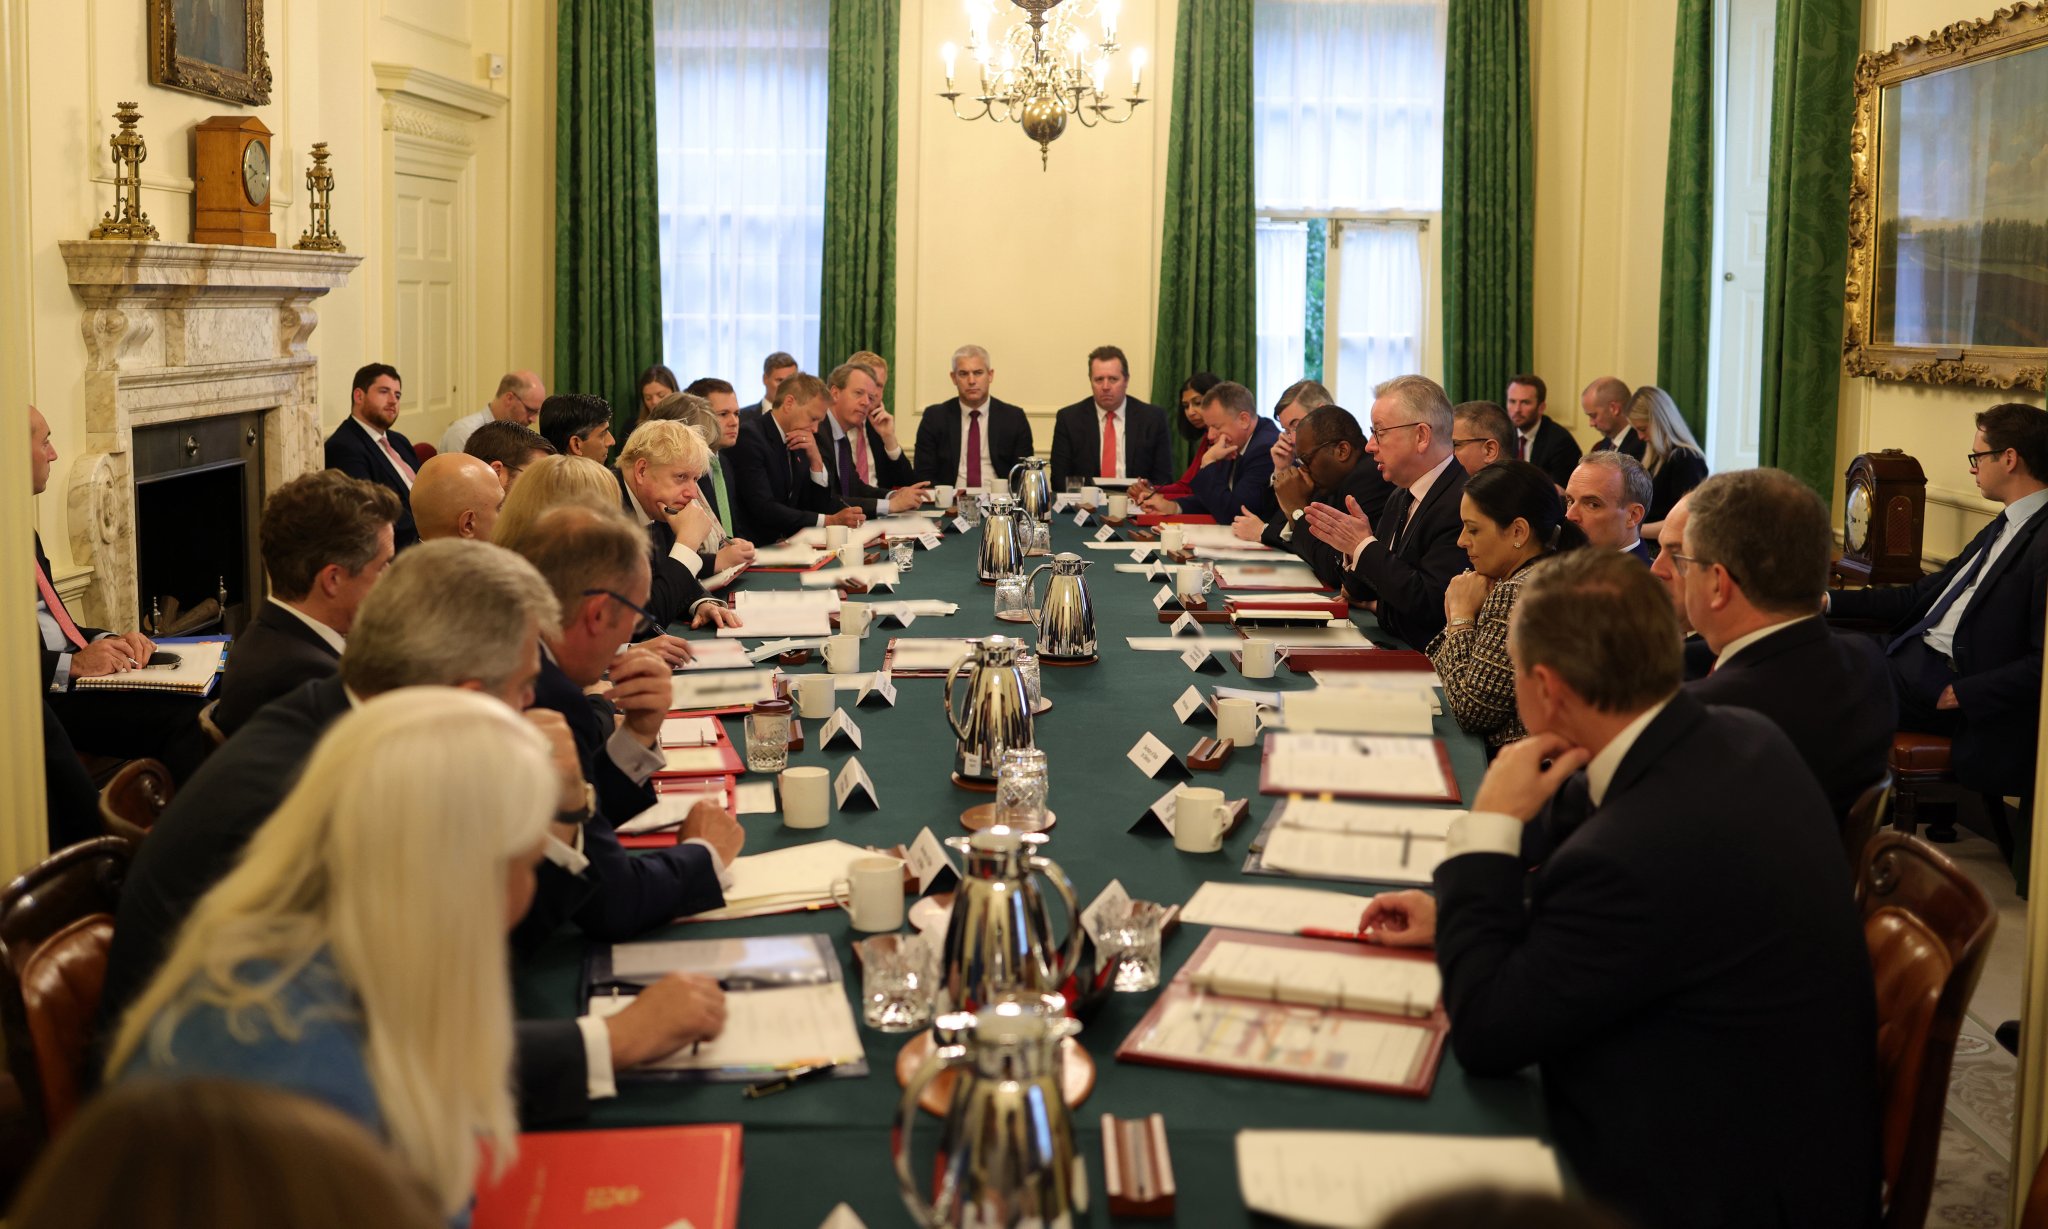 ‘One rule for them’: Boris Johnson criticised for maskless cabinet meeting